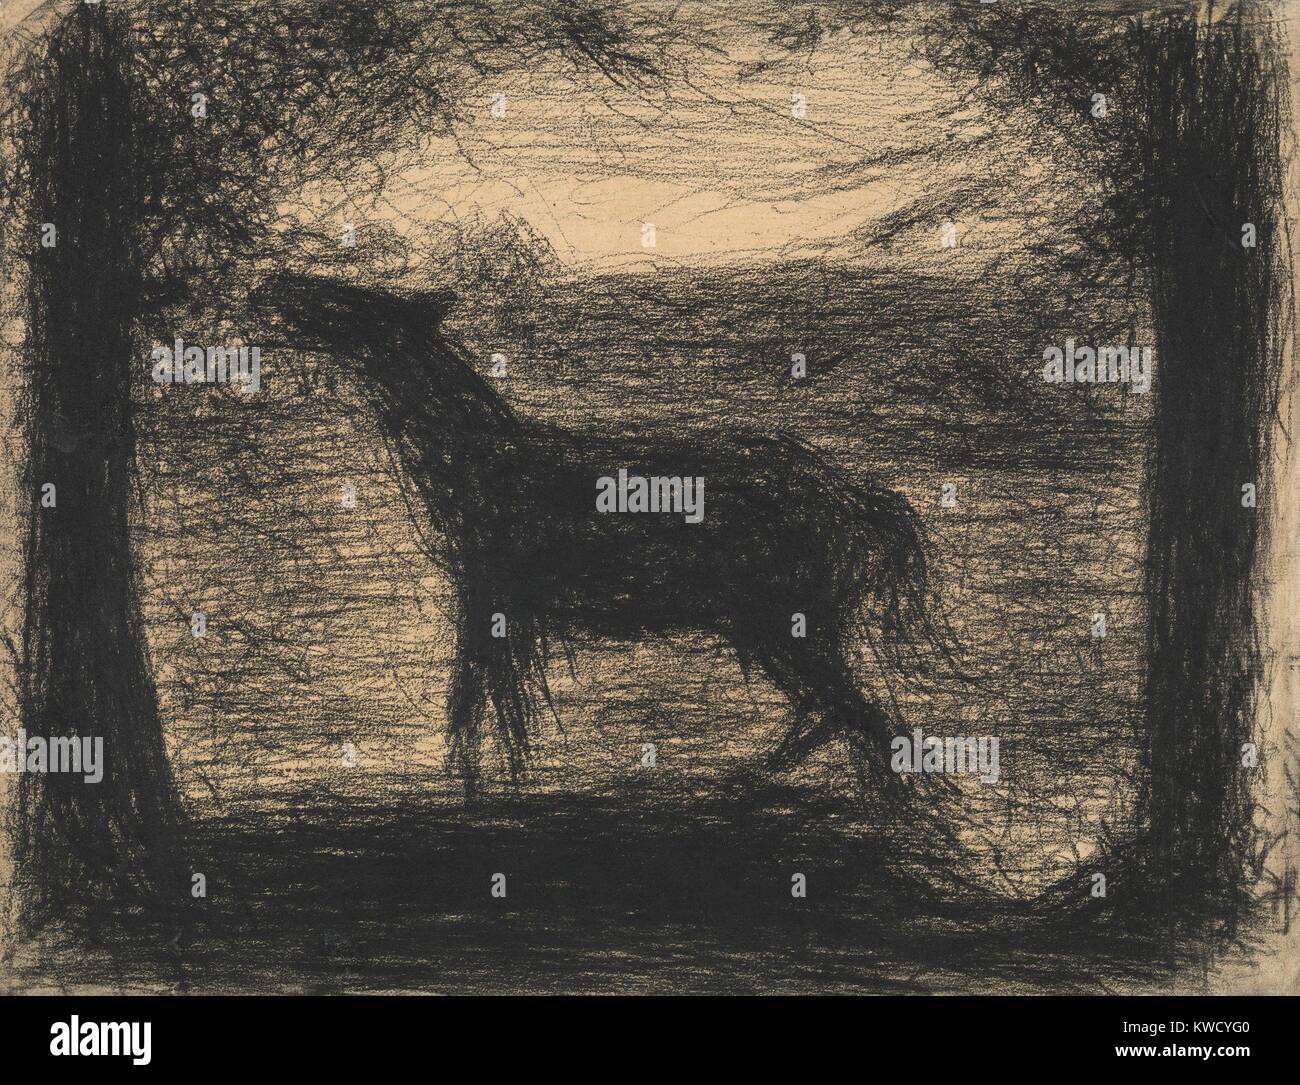 Foal (The Colt), by Georges Seurat, 1882-83, French Post-Impressionist drawing, Conte crayon. Lines create and active surface with an animals and trees silhouette against an generalized landscape (BSLOC 2017 5 86) Stock Photo